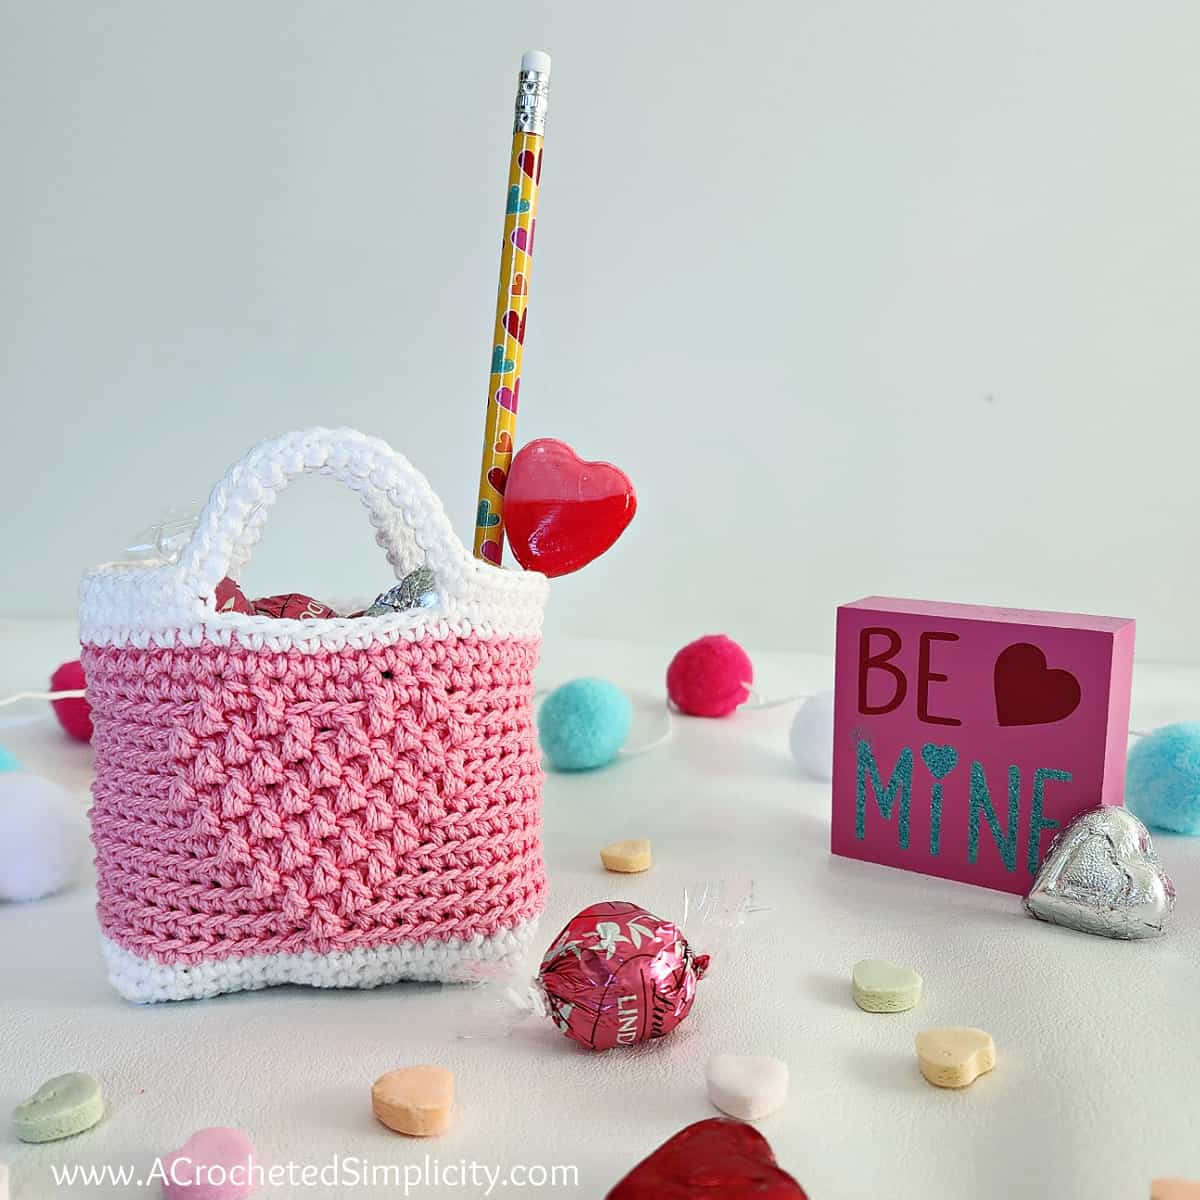 White and light pink crochet Valentine treat bag with a cute crochet heart. Truffles and chocolates are scattered around it.